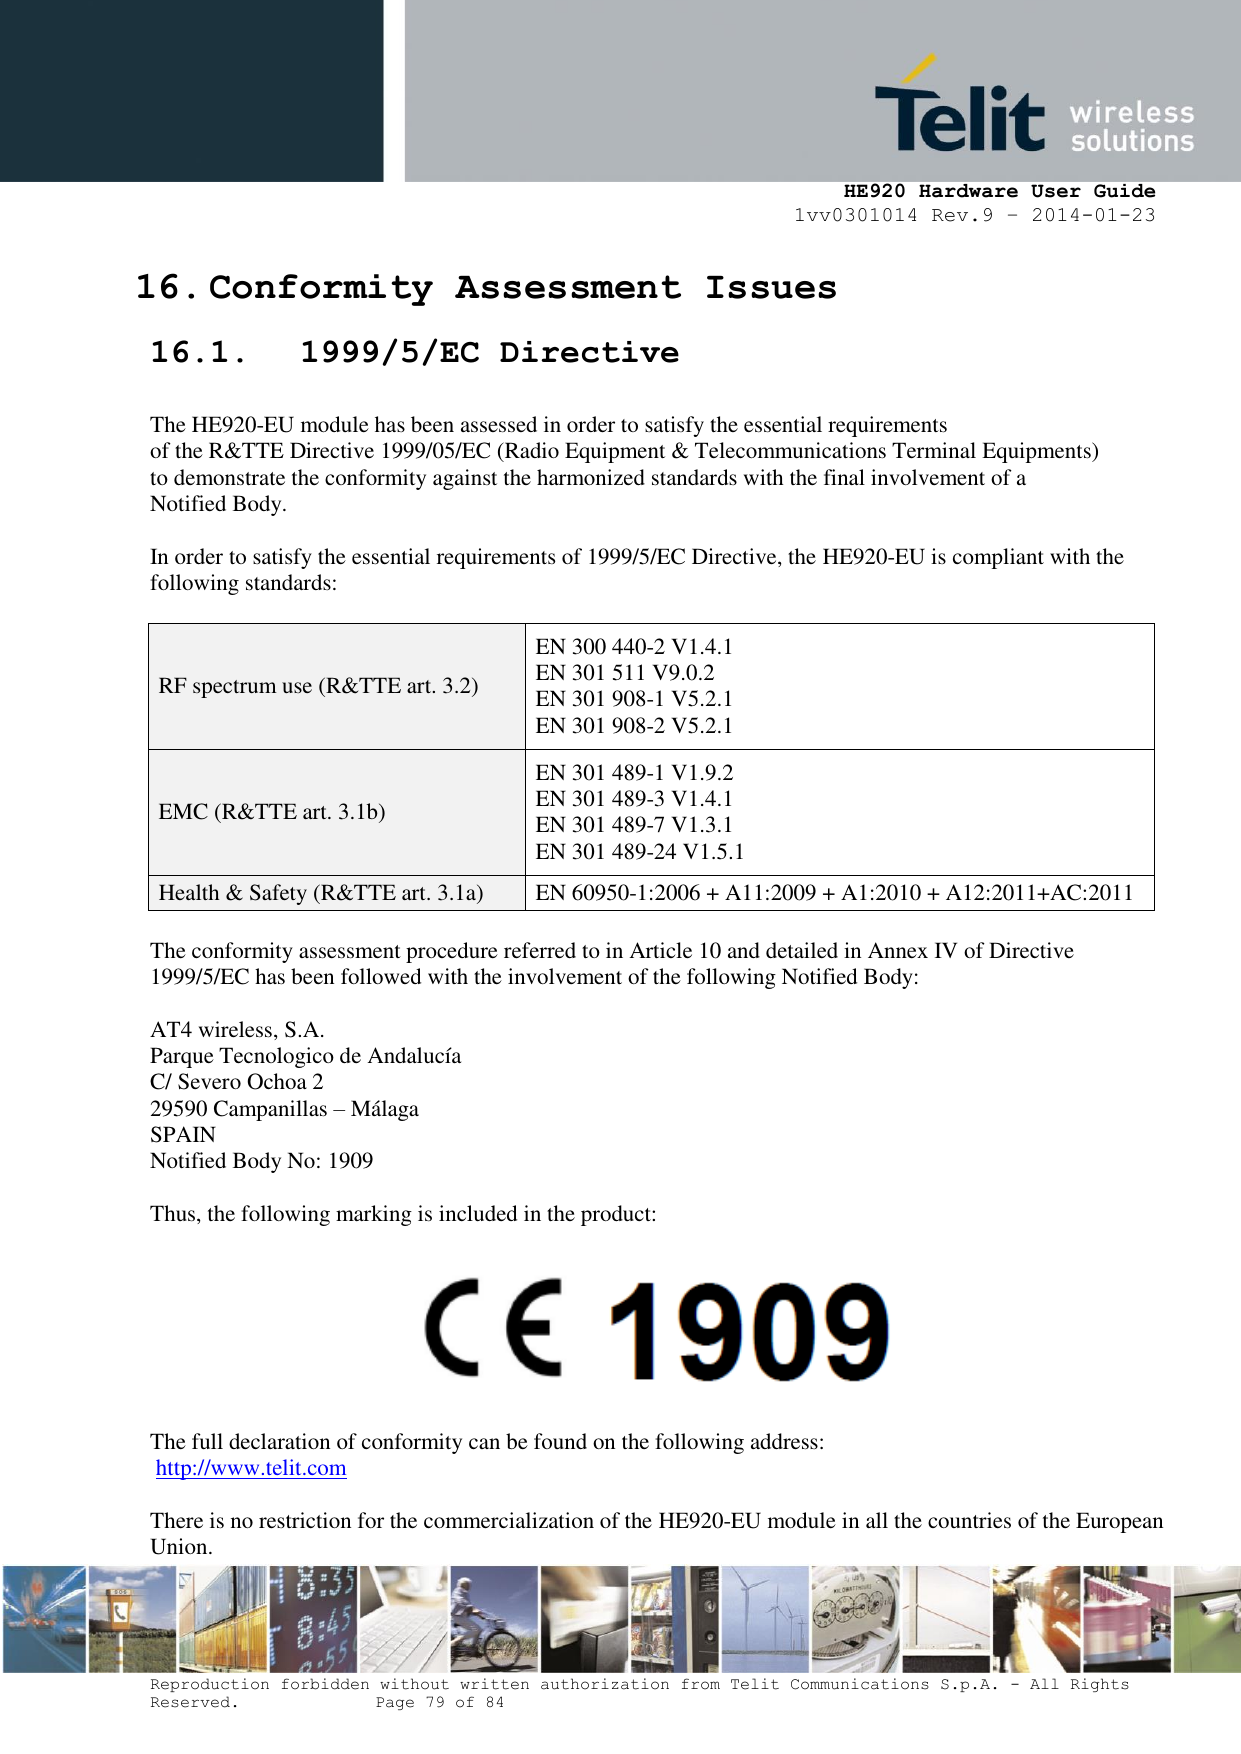     HE920 Hardware User Guide 1vv0301014 Rev.9 – 2014-01-23 Reproduction forbidden without written authorization from Telit Communications S.p.A. - All Rights Reserved.    Page 79 of 84  16. Conformity Assessment Issues 16.1. 1999/5/EC Directive  The HE920-EU module has been assessed in order to satisfy the essential requirements of the R&amp;TTE Directive 1999/05/EC (Radio Equipment &amp; Telecommunications Terminal Equipments) to demonstrate the conformity against the harmonized standards with the final involvement of a Notified Body.  In order to satisfy the essential requirements of 1999/5/EC Directive, the HE920-EU is compliant with the following standards:  RF spectrum use (R&amp;TTE art. 3.2) EN 300 440-2 V1.4.1 EN 301 511 V9.0.2 EN 301 908-1 V5.2.1 EN 301 908-2 V5.2.1 EMC (R&amp;TTE art. 3.1b) EN 301 489-1 V1.9.2 EN 301 489-3 V1.4.1  EN 301 489-7 V1.3.1 EN 301 489-24 V1.5.1 Health &amp; Safety (R&amp;TTE art. 3.1a) EN 60950-1:2006 + A11:2009 + A1:2010 + A12:2011+AC:2011  The conformity assessment procedure referred to in Article 10 and detailed in Annex IV of Directive 1999/5/EC has been followed with the involvement of the following Notified Body:   AT4 wireless, S.A. Parque Tecnologico de Andalucía C/ Severo Ochoa 2 29590 Campanillas – Málaga SPAIN Notified Body No: 1909  Thus, the following marking is included in the product:    The full declaration of conformity can be found on the following address:  http://www.telit.com  There is no restriction for the commercialization of the HE920-EU module in all the countries of the European Union. 